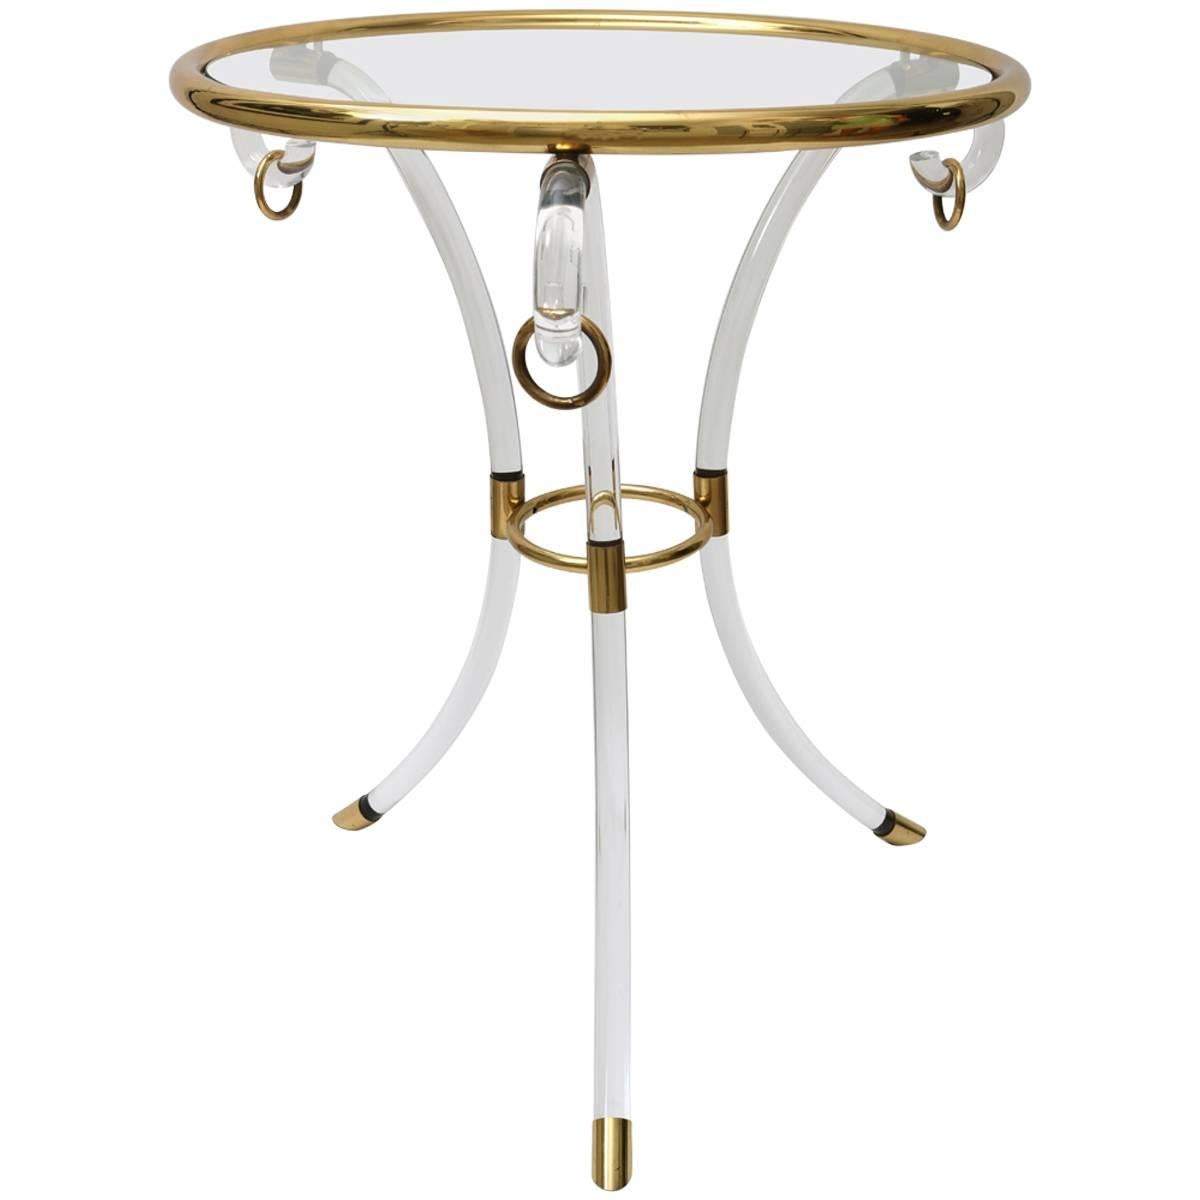  Charles Hollis Jones Lucite and Brass Gueridon Table